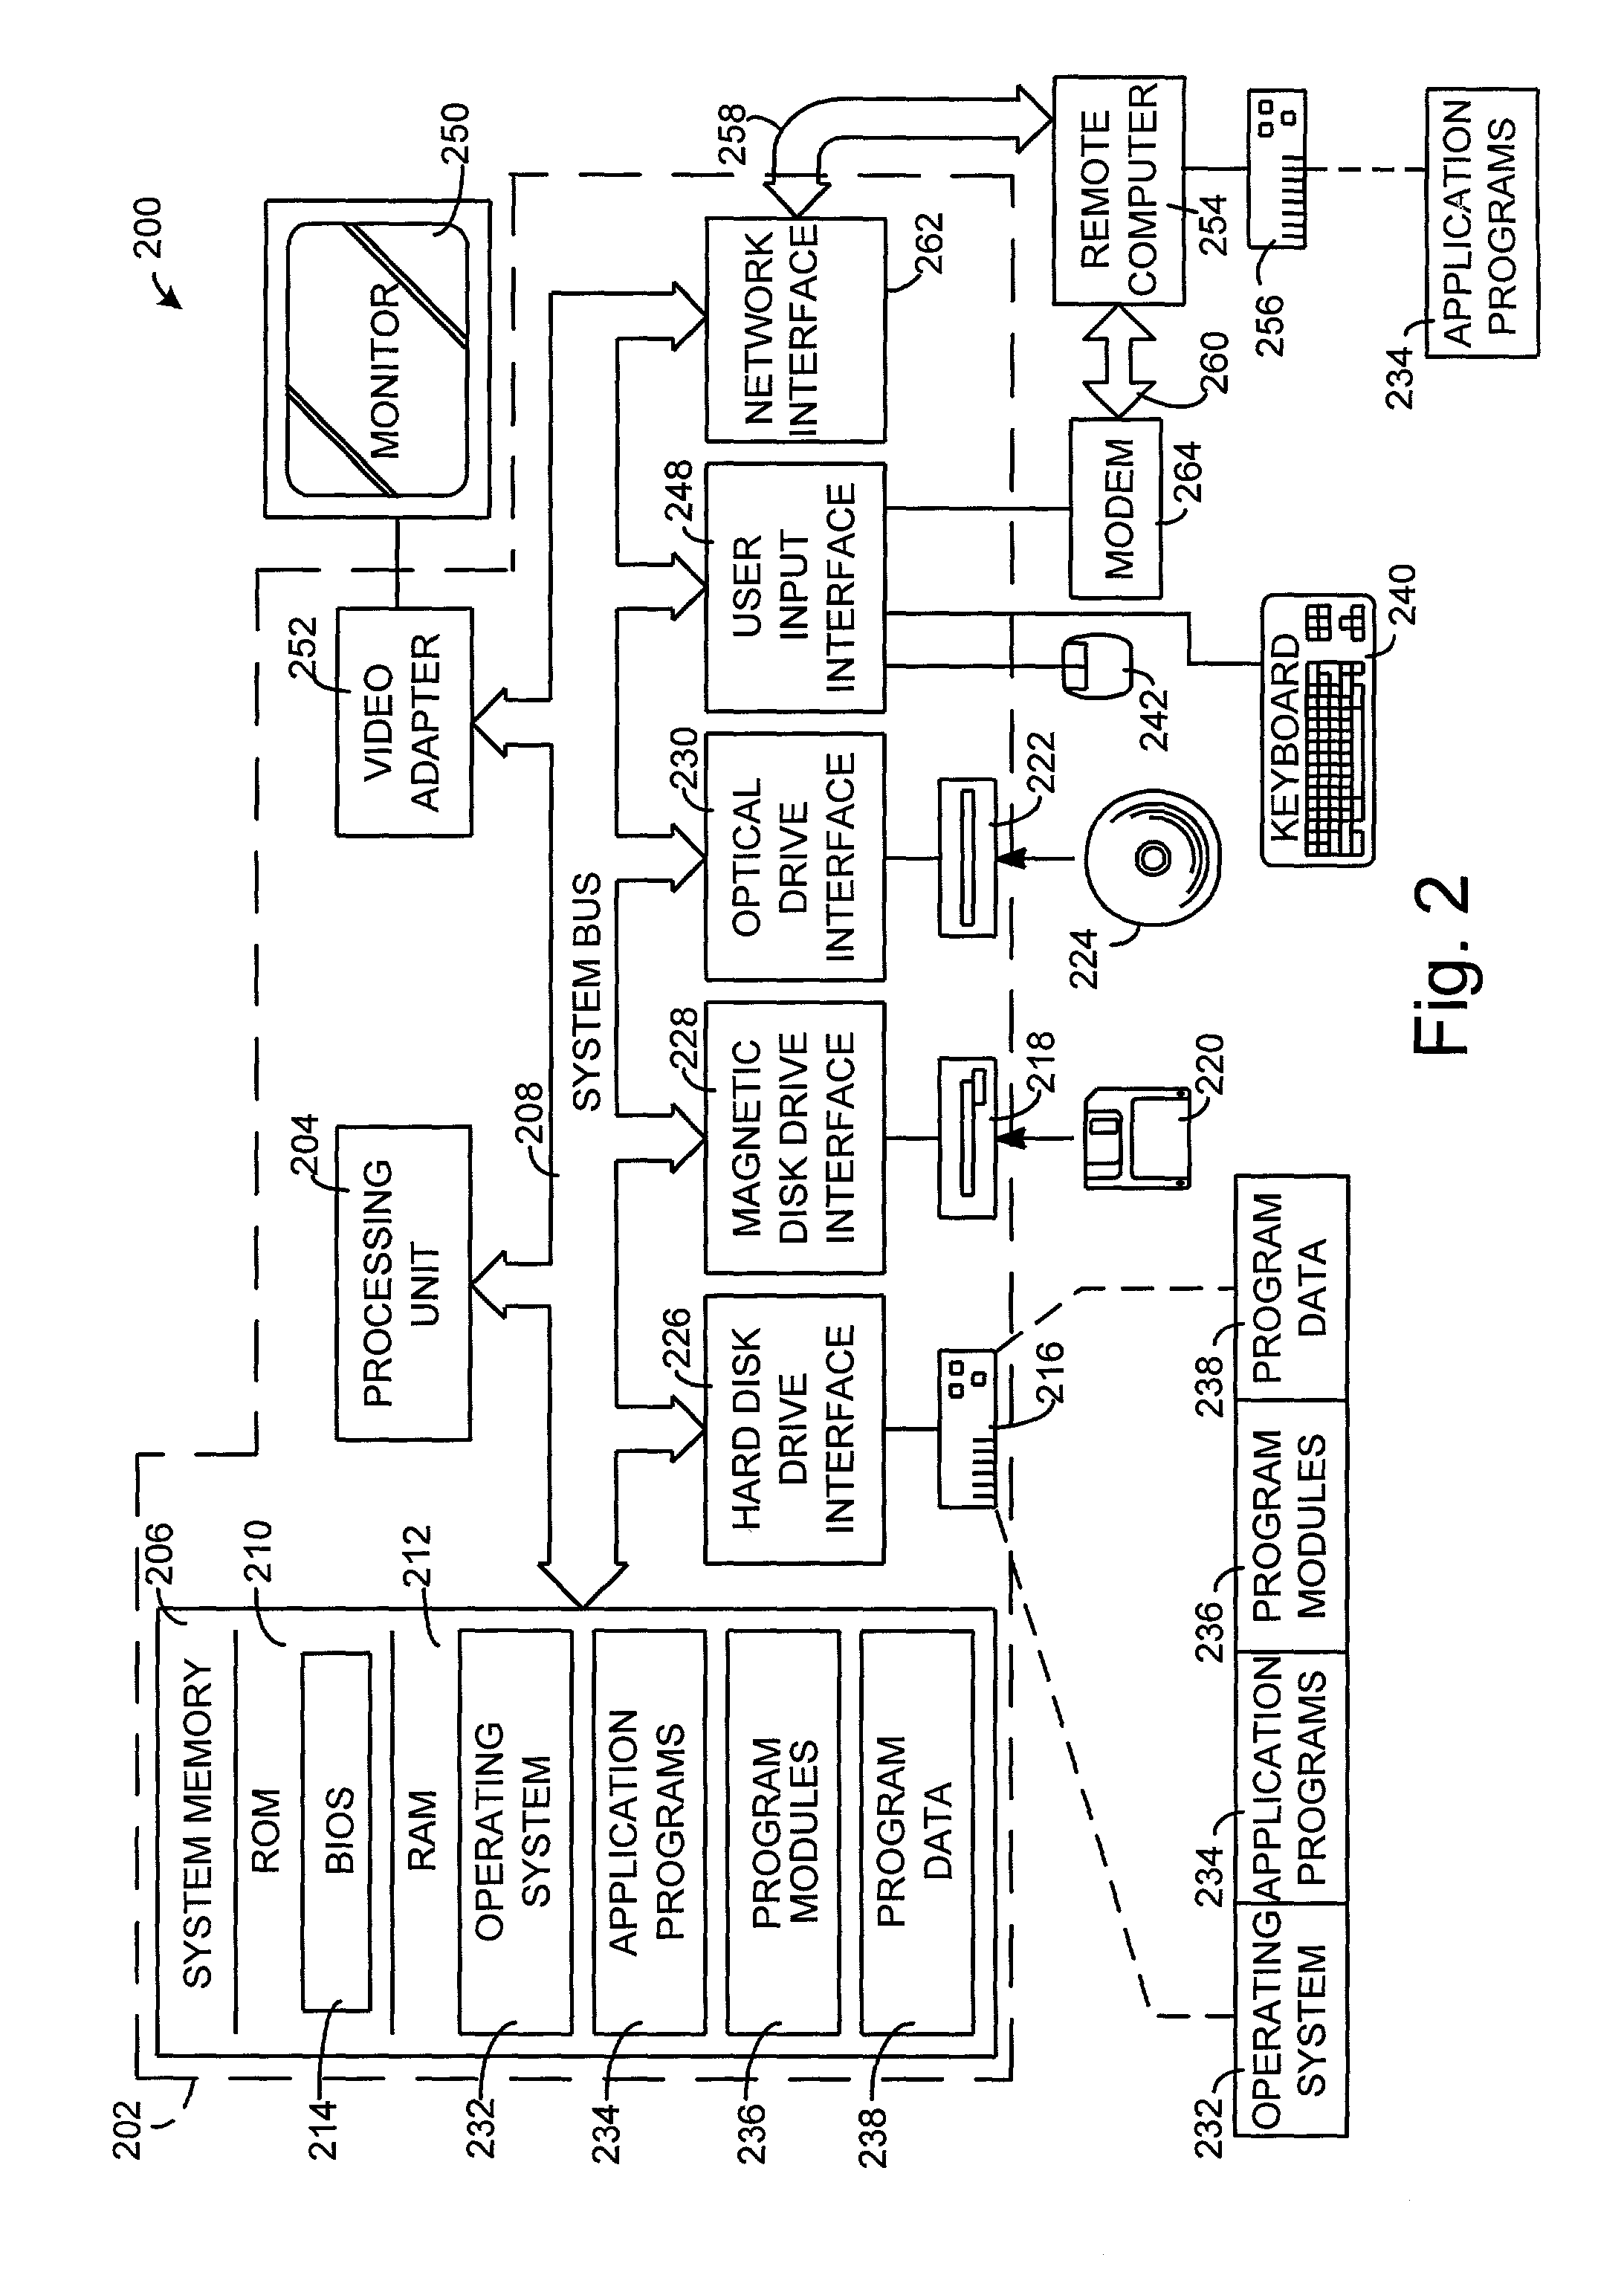 Method and system for managing resources in a distributed environment that has an associated object